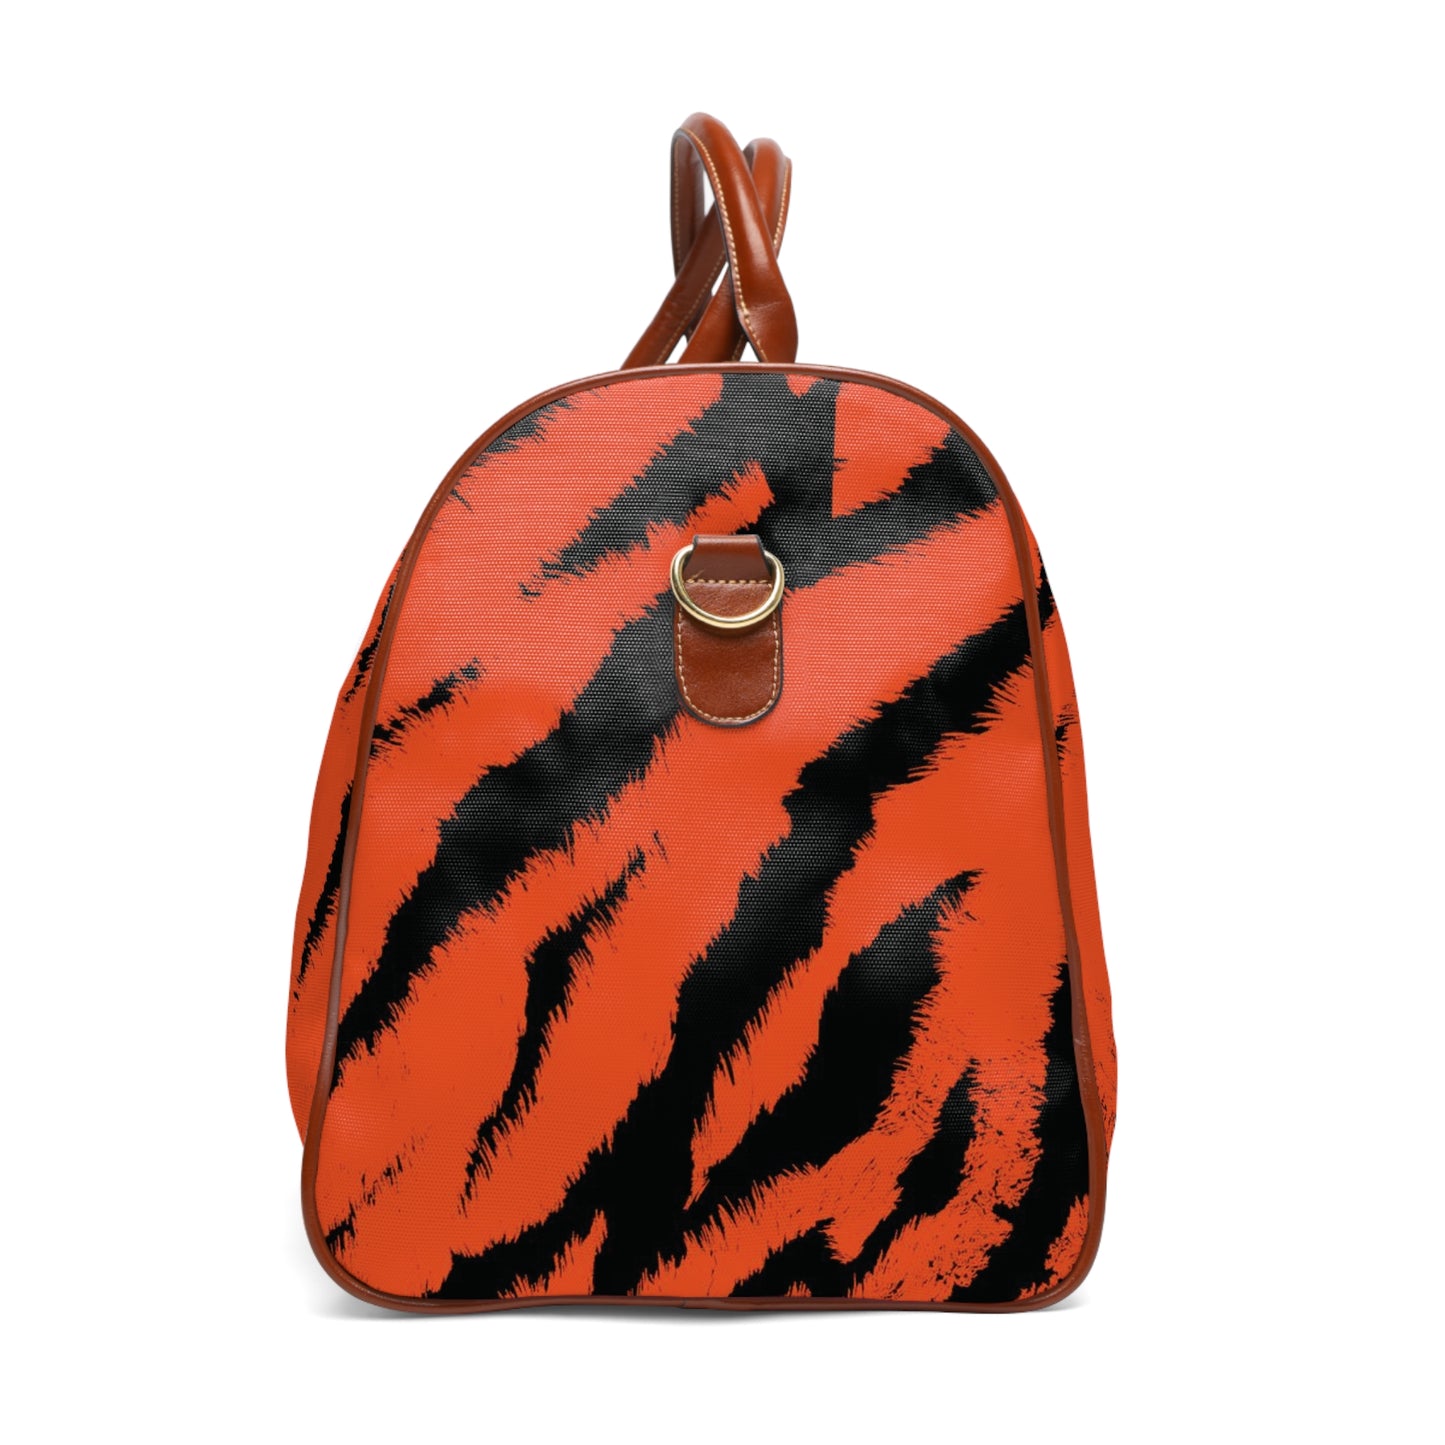 Travel with a Bengal - Waterproof Travel Bag